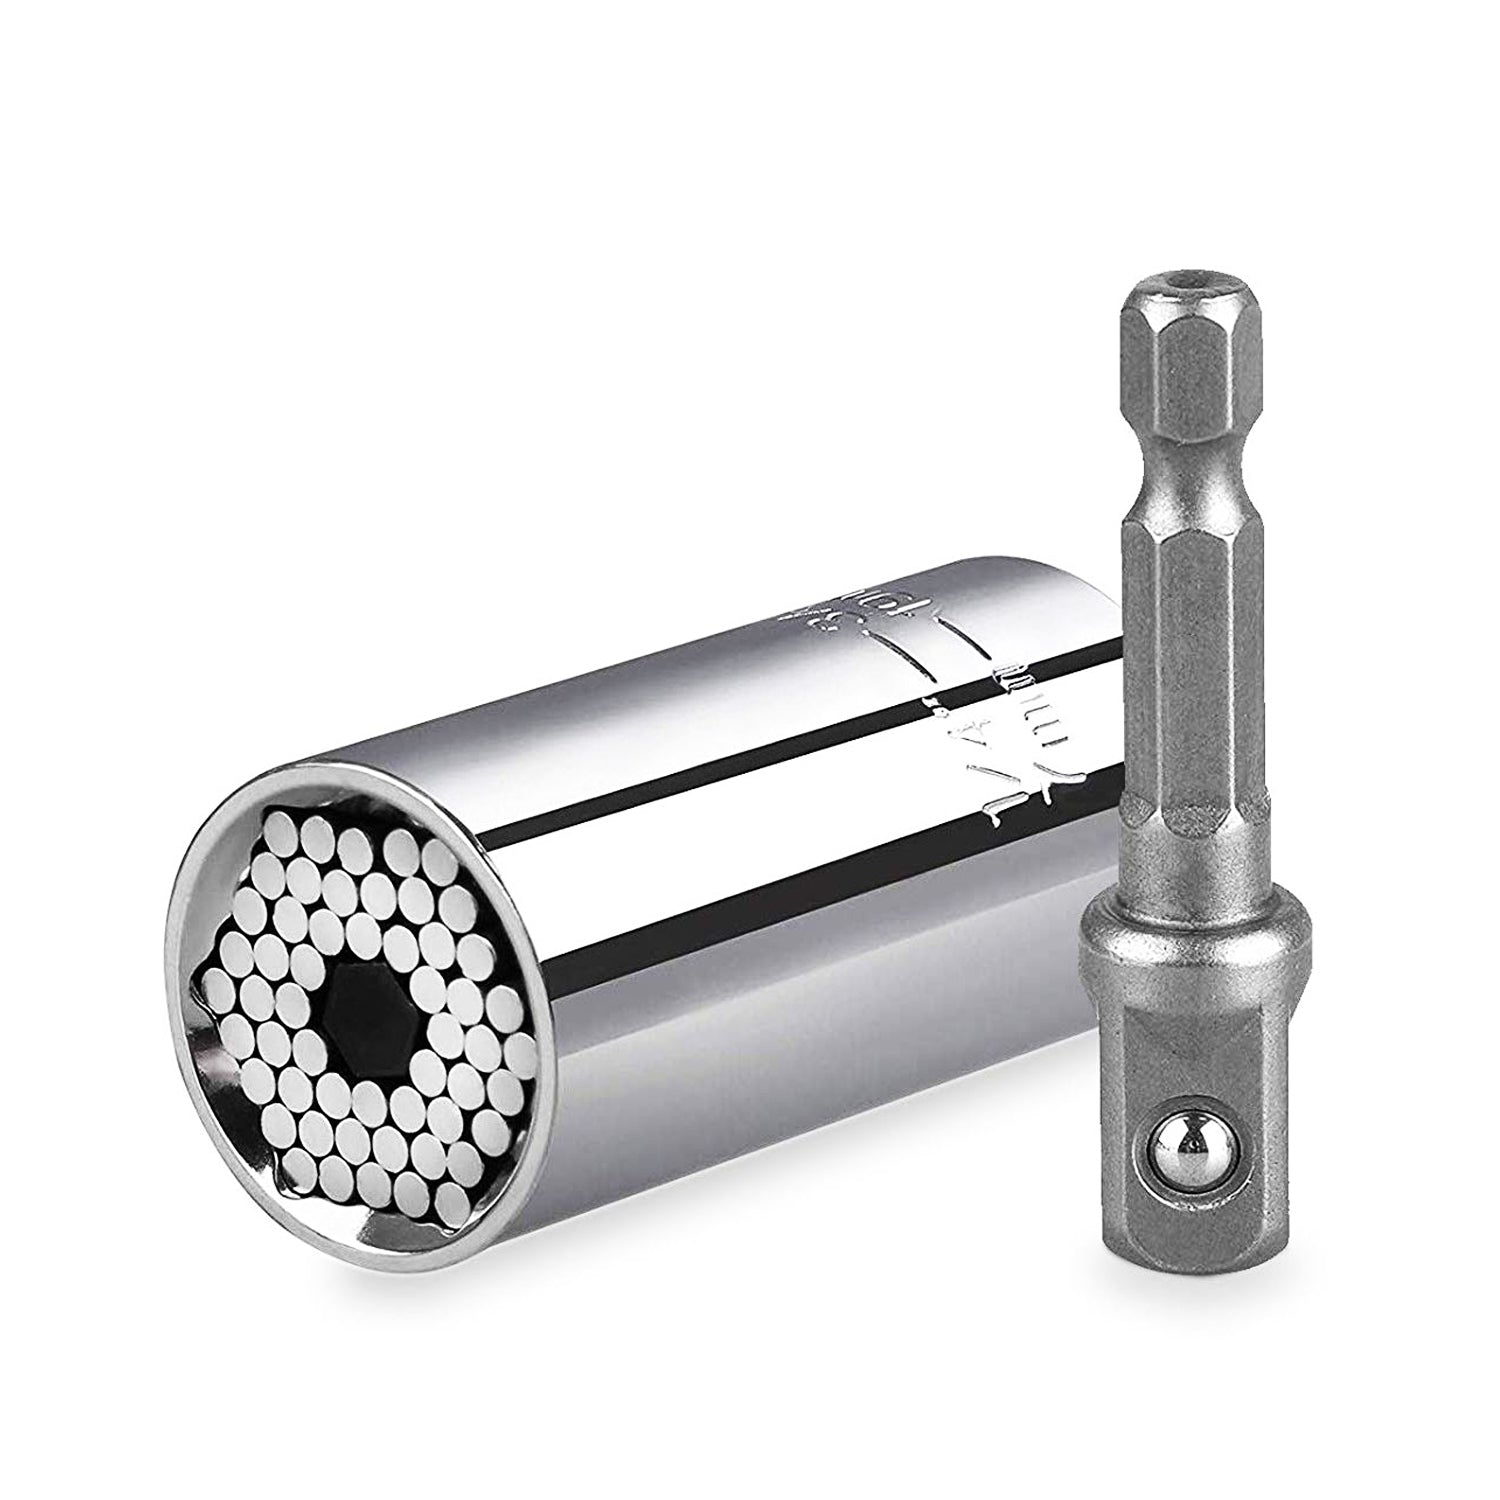 Gator Grip Universal Socket Wrench Power Drill Adapter - South East Clearance Centre